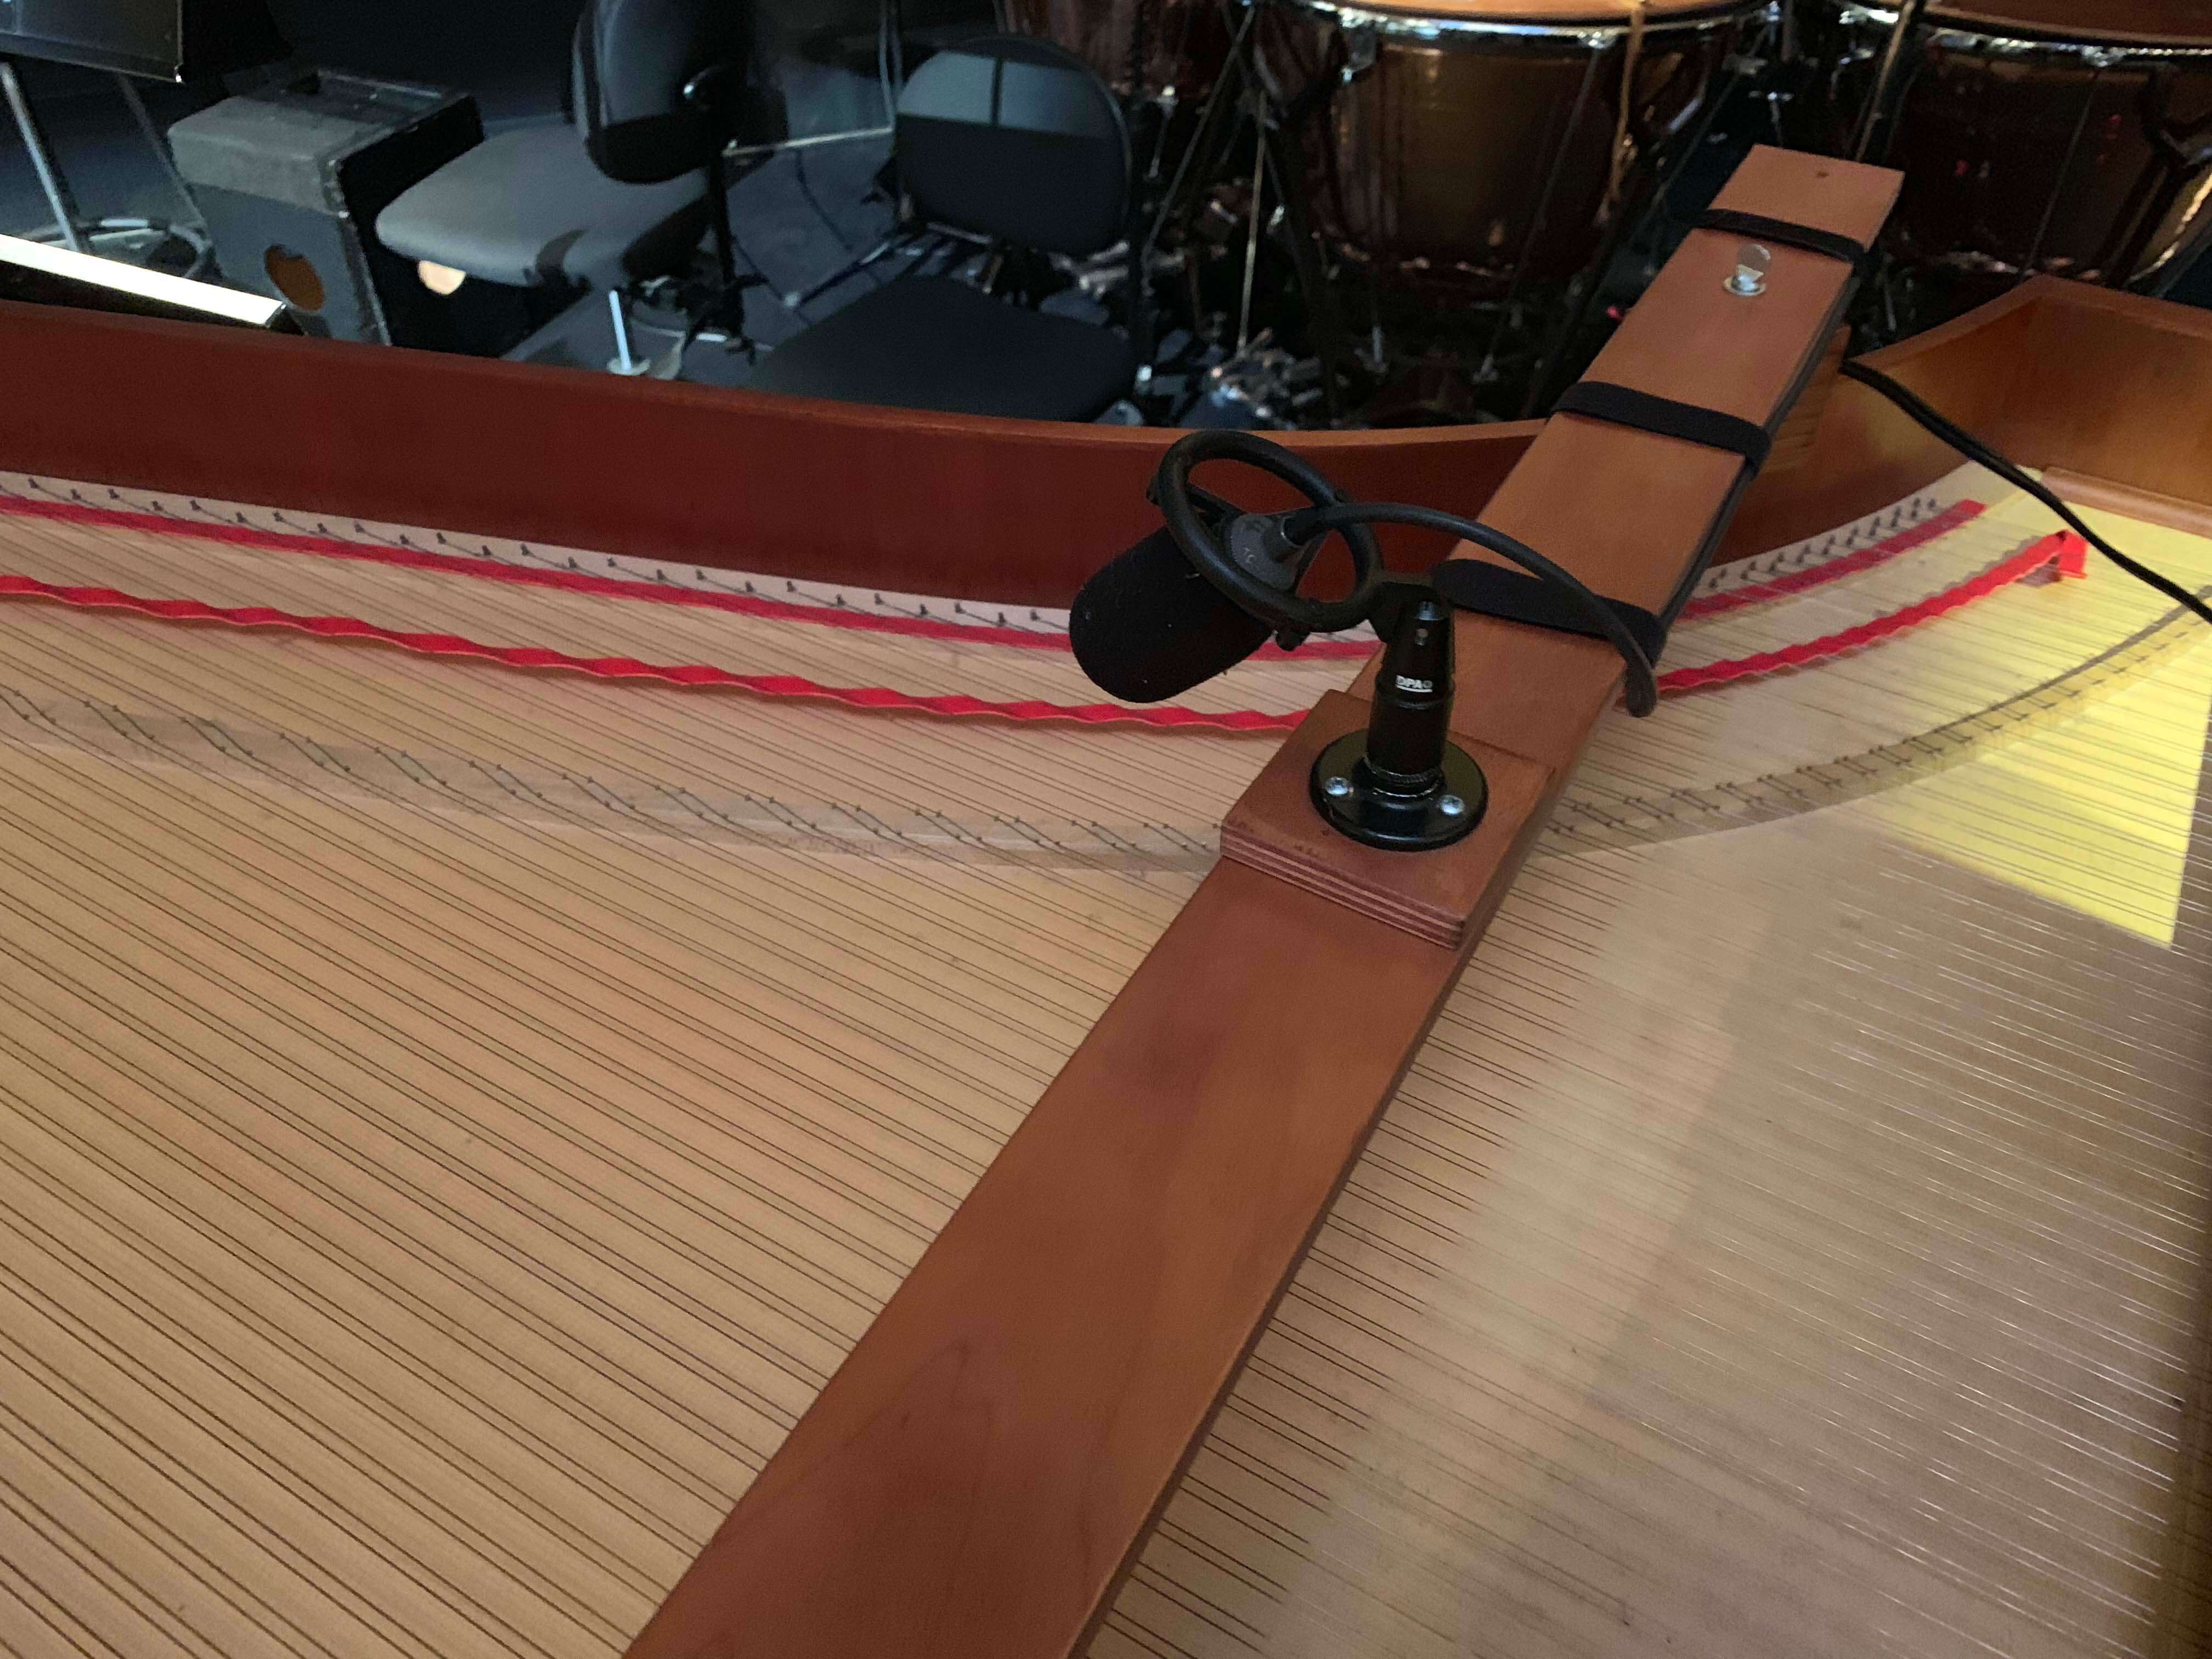 As the continuo fortepiano is not the loudest instrument and doesn’t always carry naturally back towards the stage, we relay it back onto the stage through ‘monitors’ so that the singers can hear it more clearly. Here you can see the microphone that will pick up the instrument.